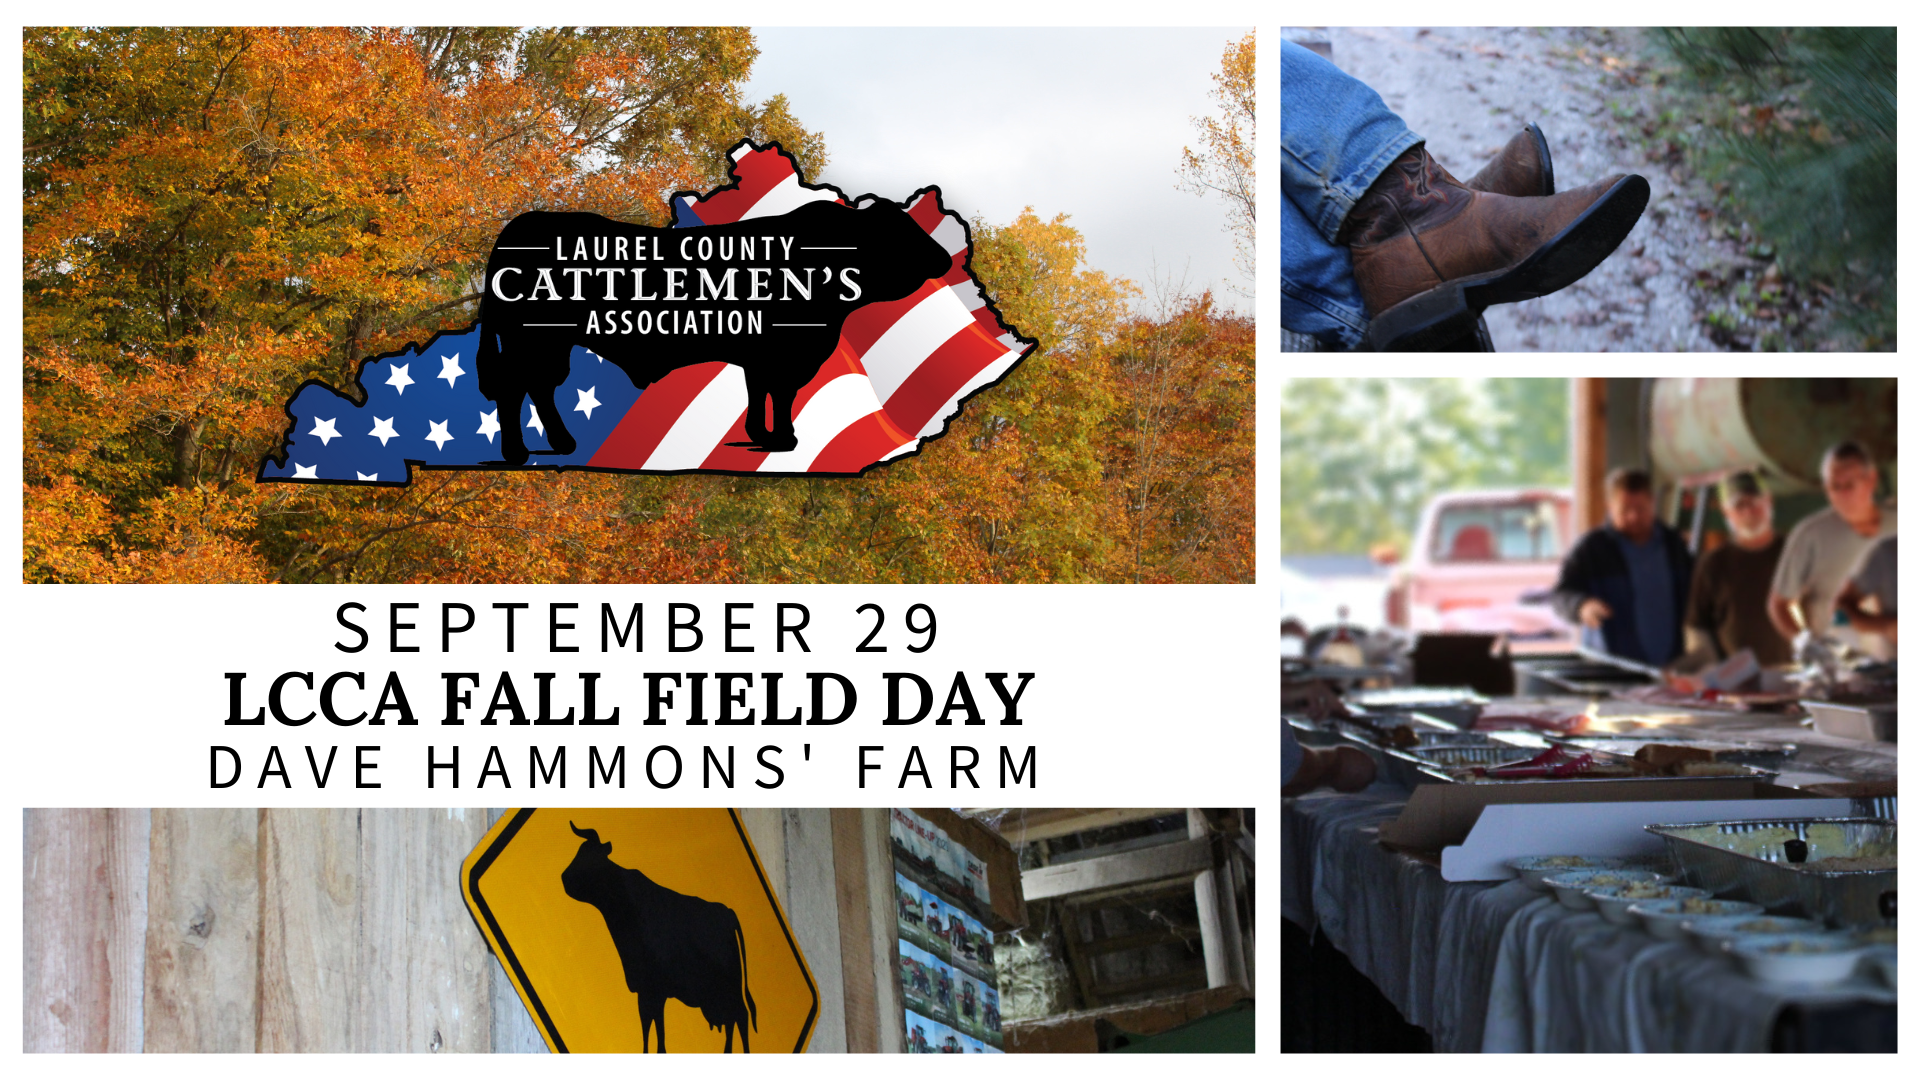 Four photos, fall trees, boots crossed, cattle crossing sign, buffet with food inside a barn; with LCCA logo in upper left, text September 29 LCCA Fall Field Day Dave Hammons Farm